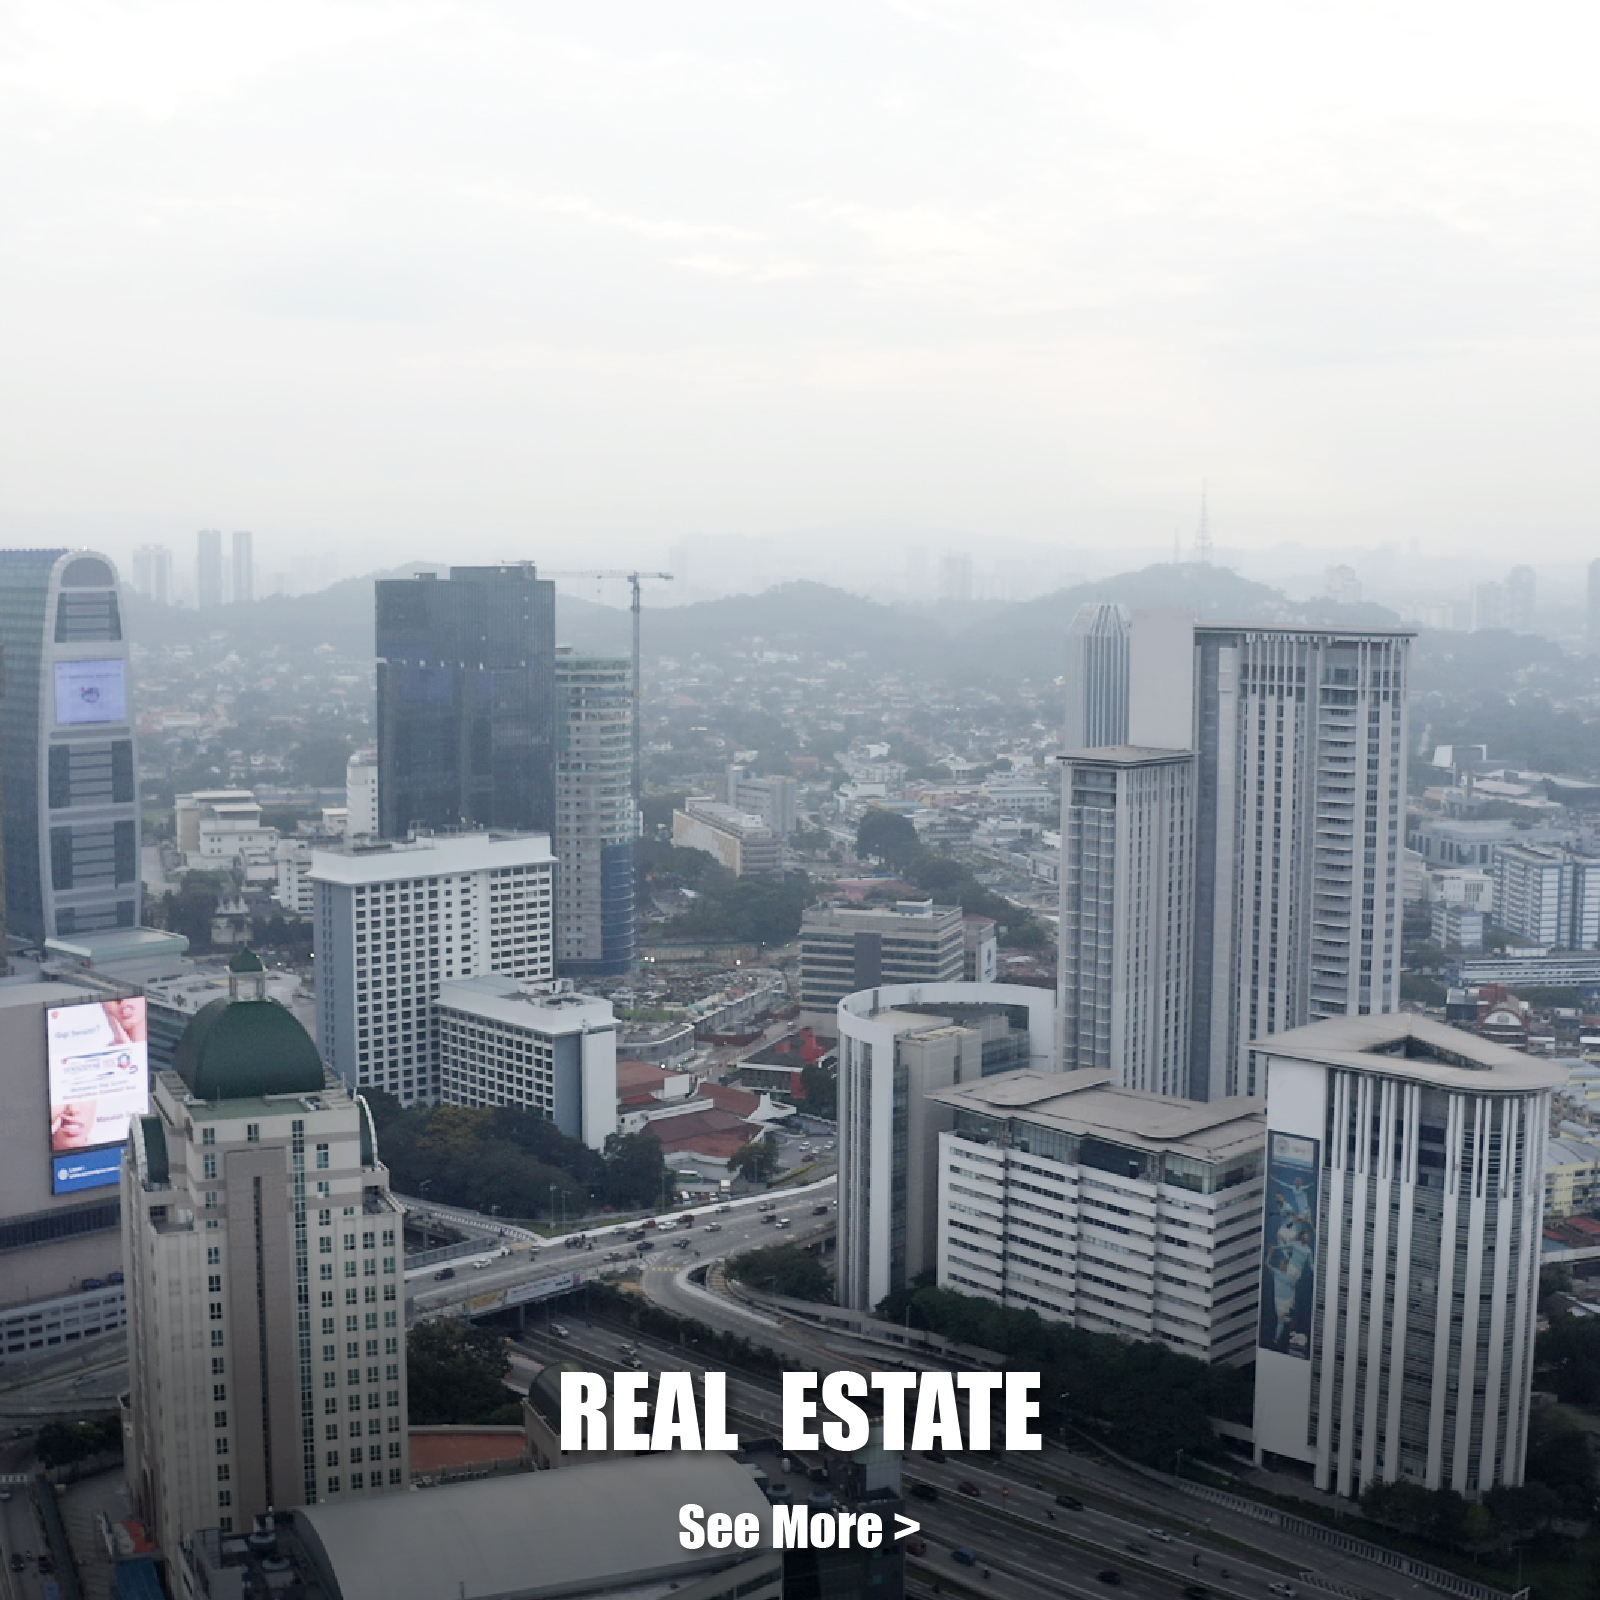 Real Estate Image V2 - Our Businesses Section - Homepage-01